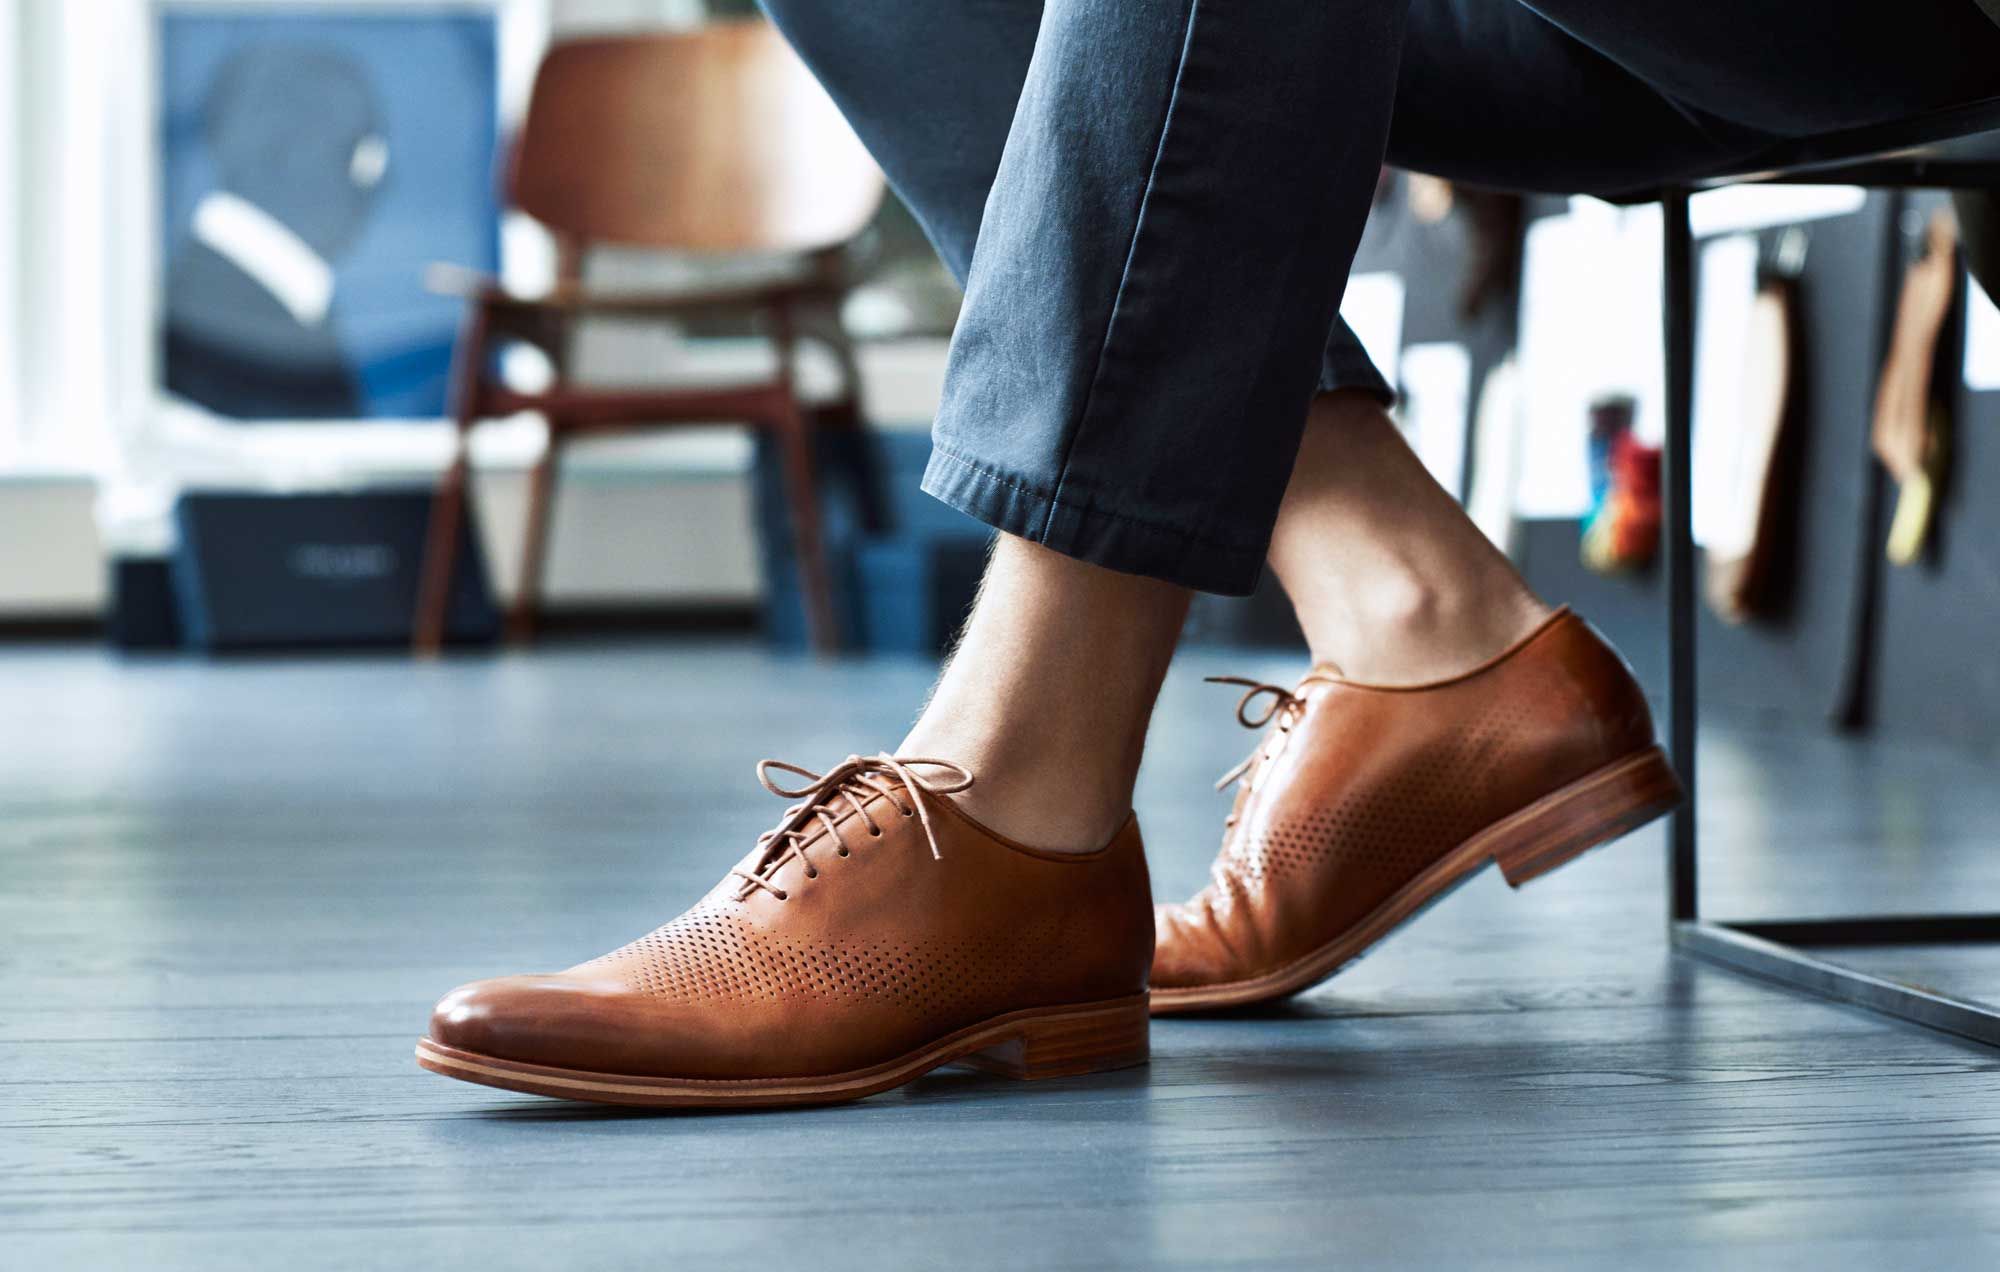 Are Cole Haan Good Dress Shoes?